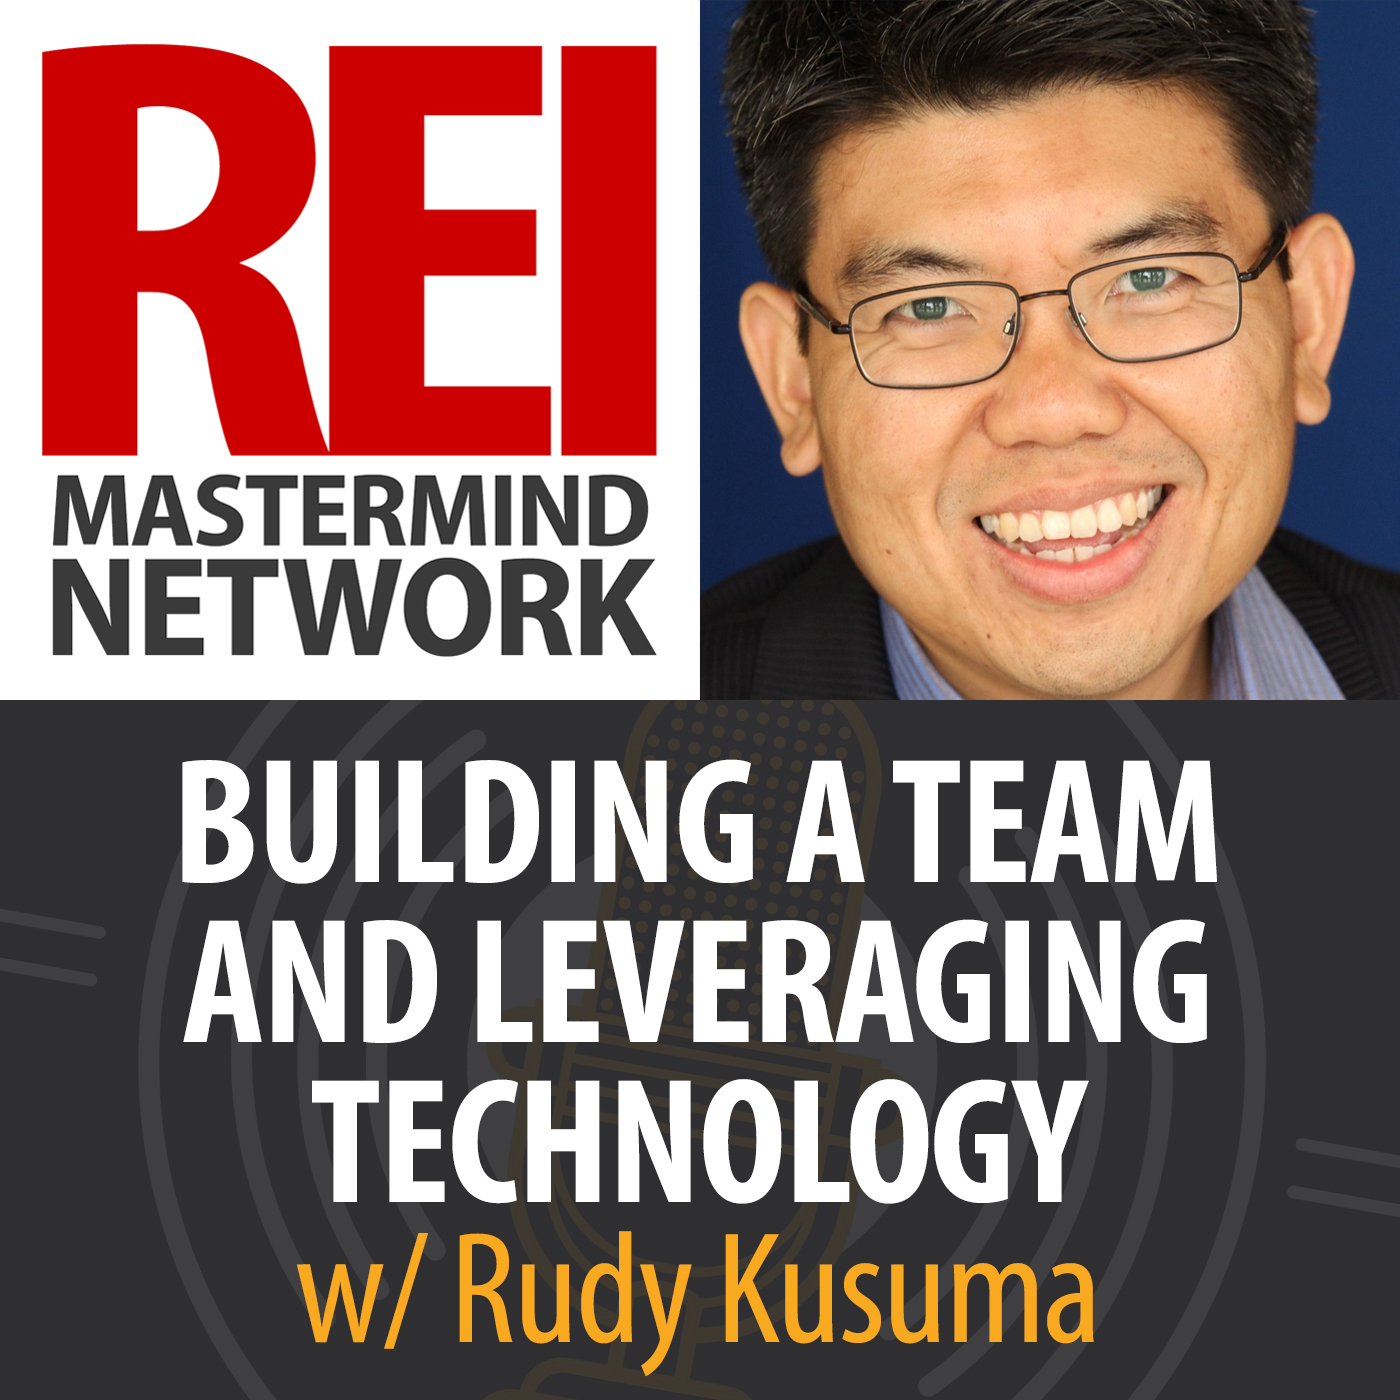 Building a Team and Leveraging Technology with Rudy Kusuma